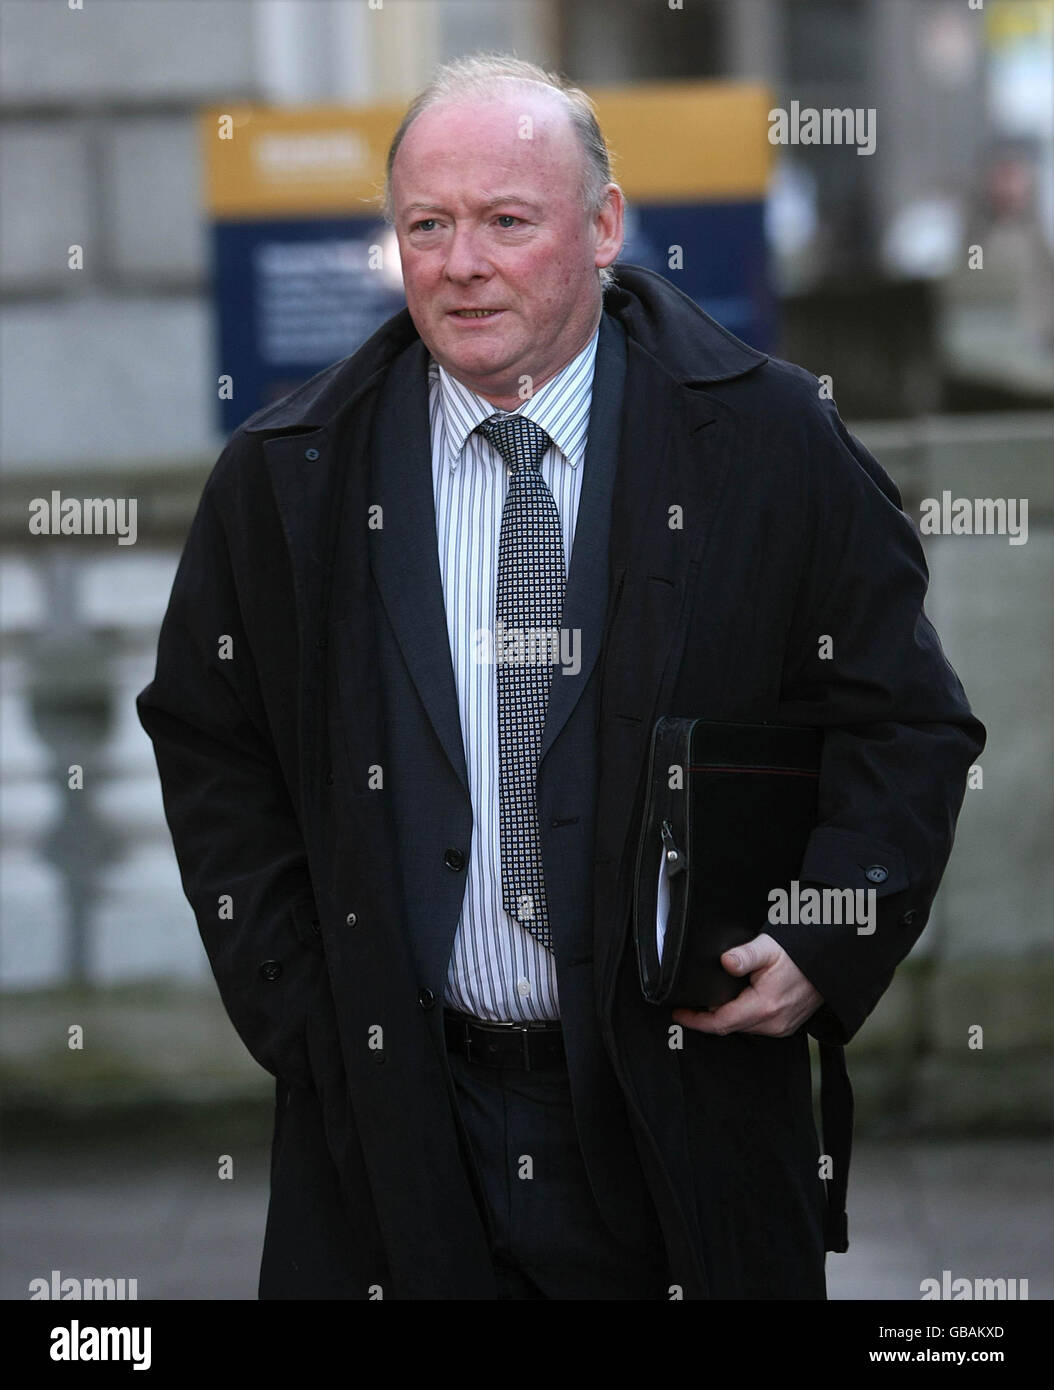 Former Fas chief Rody Molloy arrives at the Dail in Dublin, where he faces questioning by the Dail Public Accounts Committee (PAC) about lavish expenses clocked up by top executives at the beleaguered state agency. Stock Photo